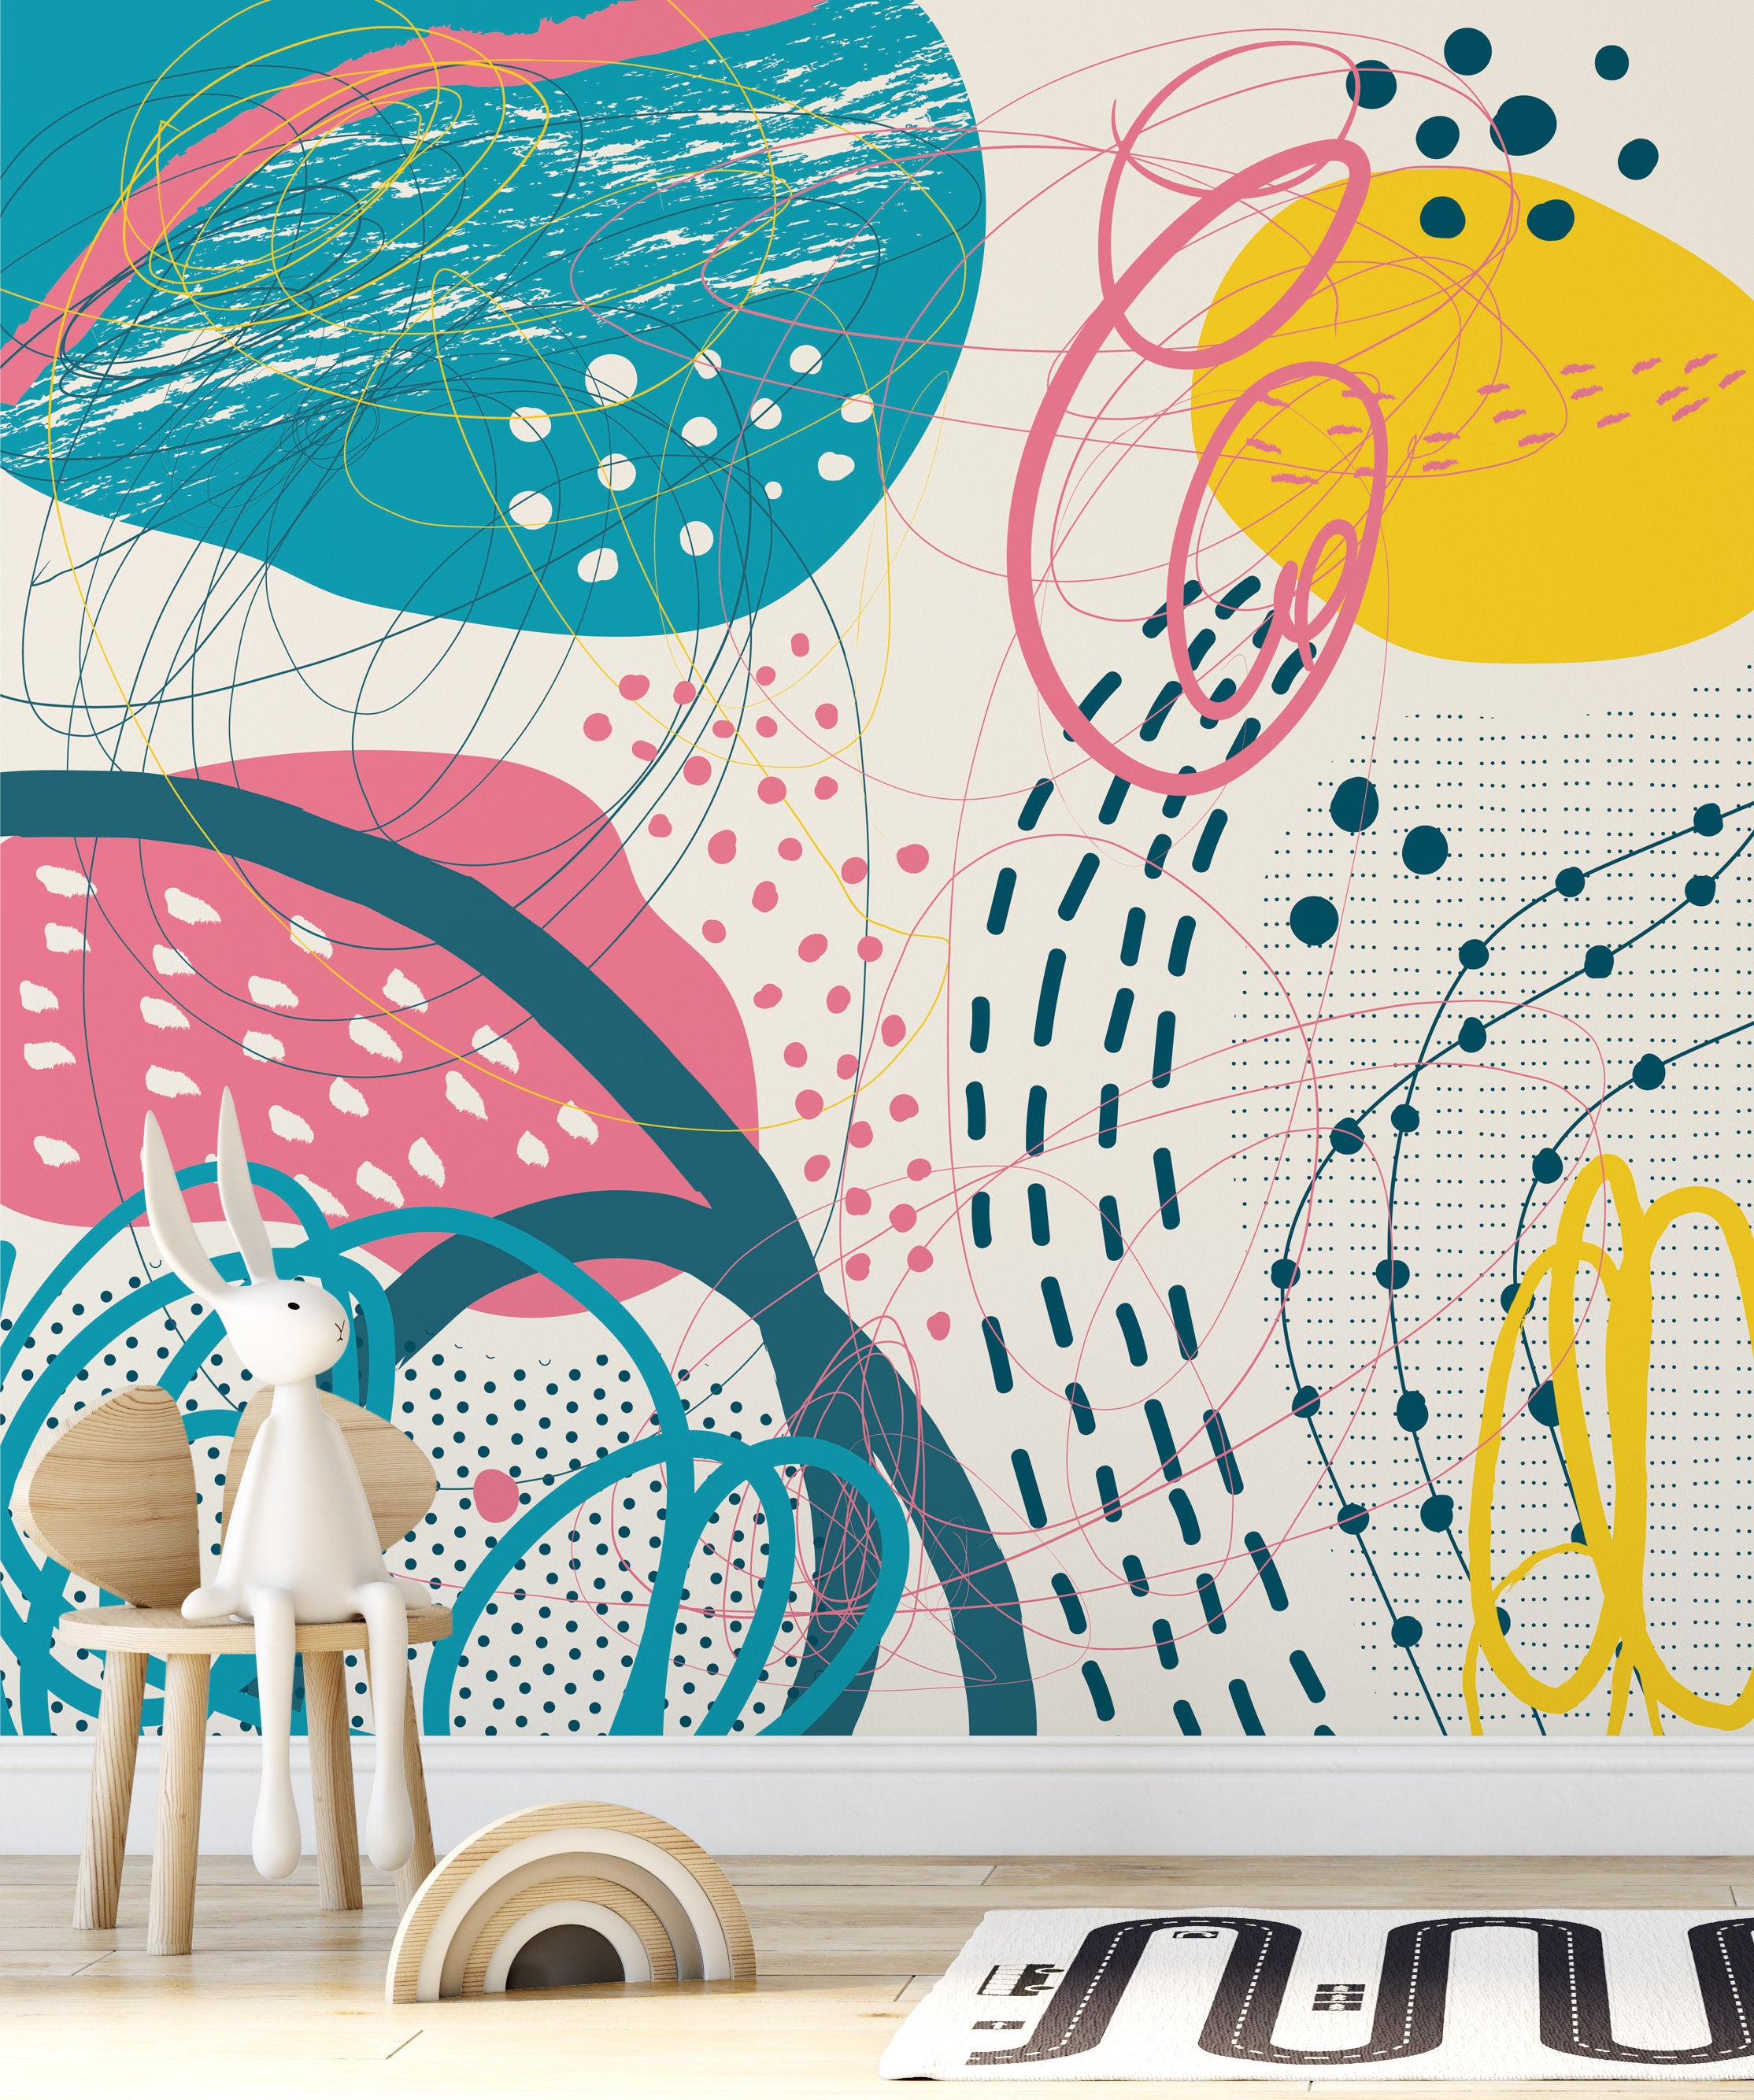 Creative Doodle Art Header with Different Shapes Wallpaper Self Adhesive Peel and Stick Wall Sticker Wall Decoration Scandinavian Removable